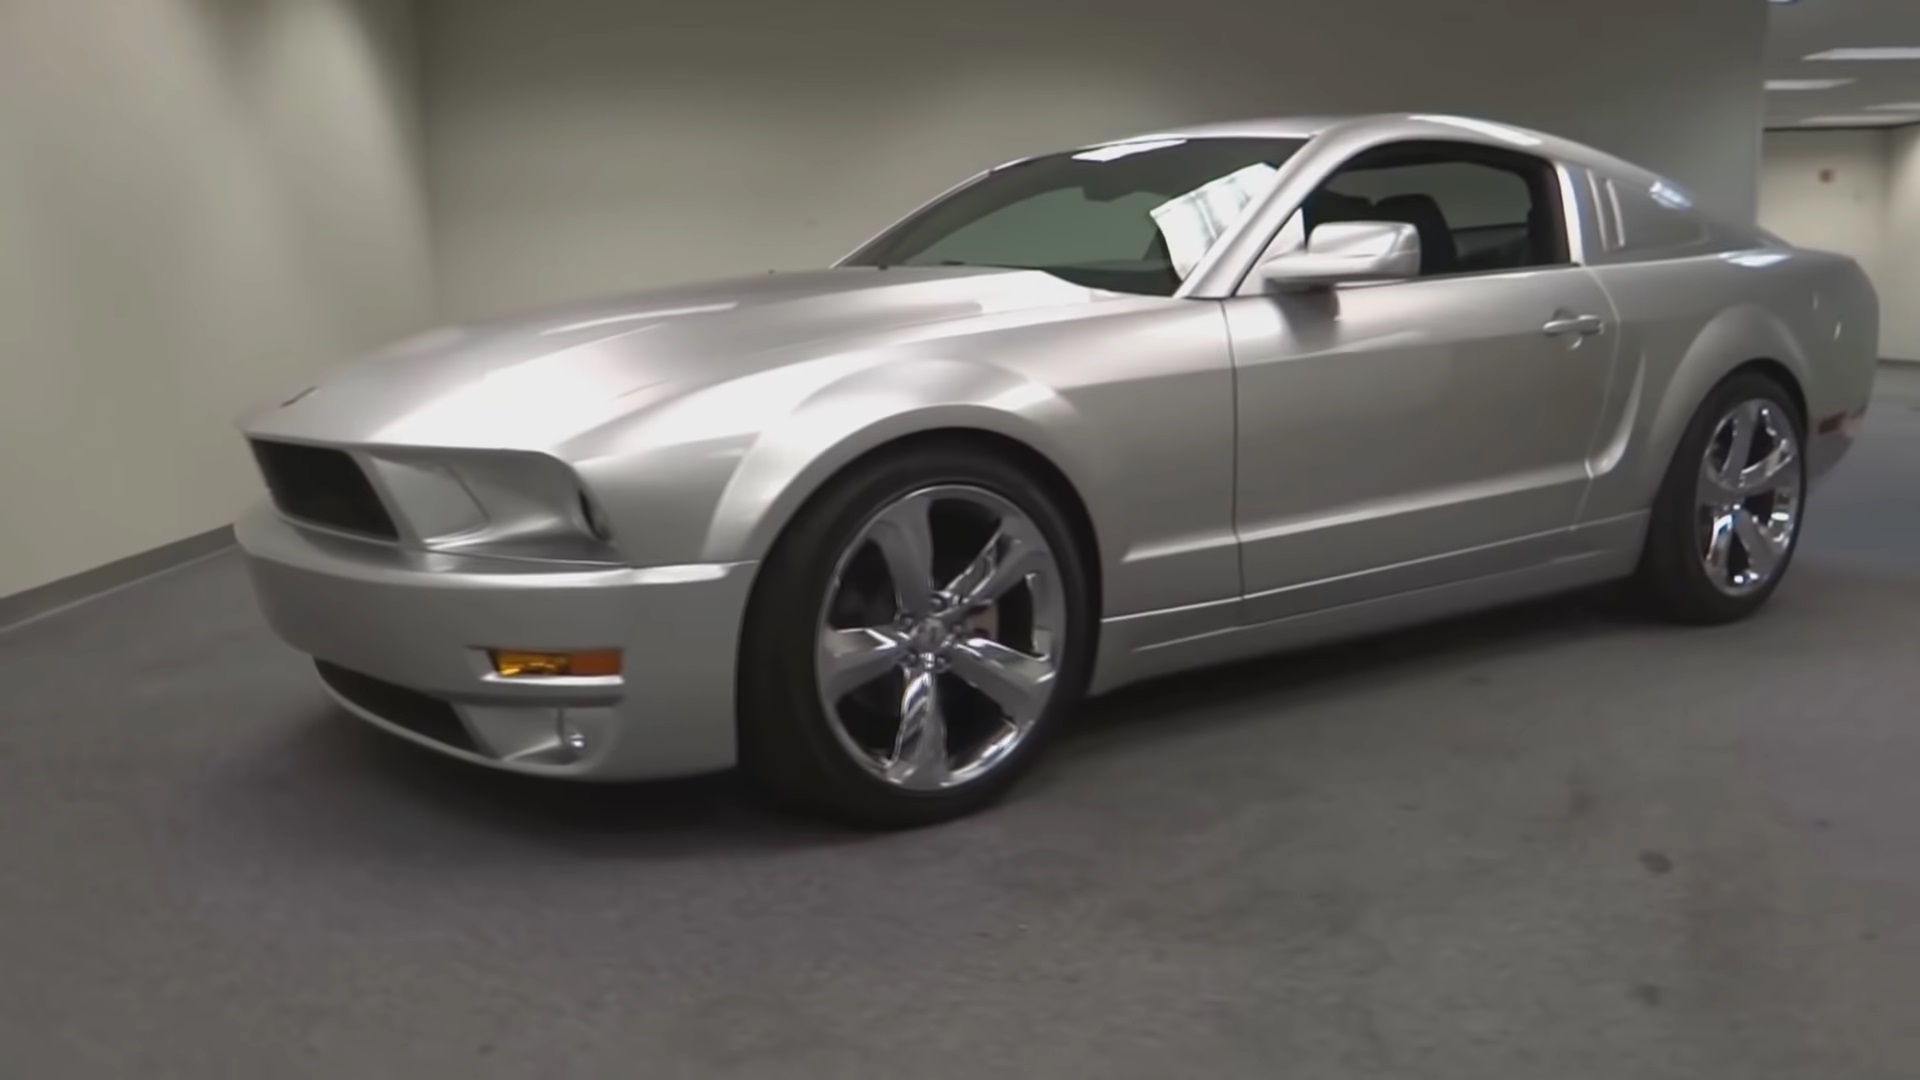 Video: 2009 Ford Mustang Lee Iacocca Silver 45th Anniversary Edition Walkaround